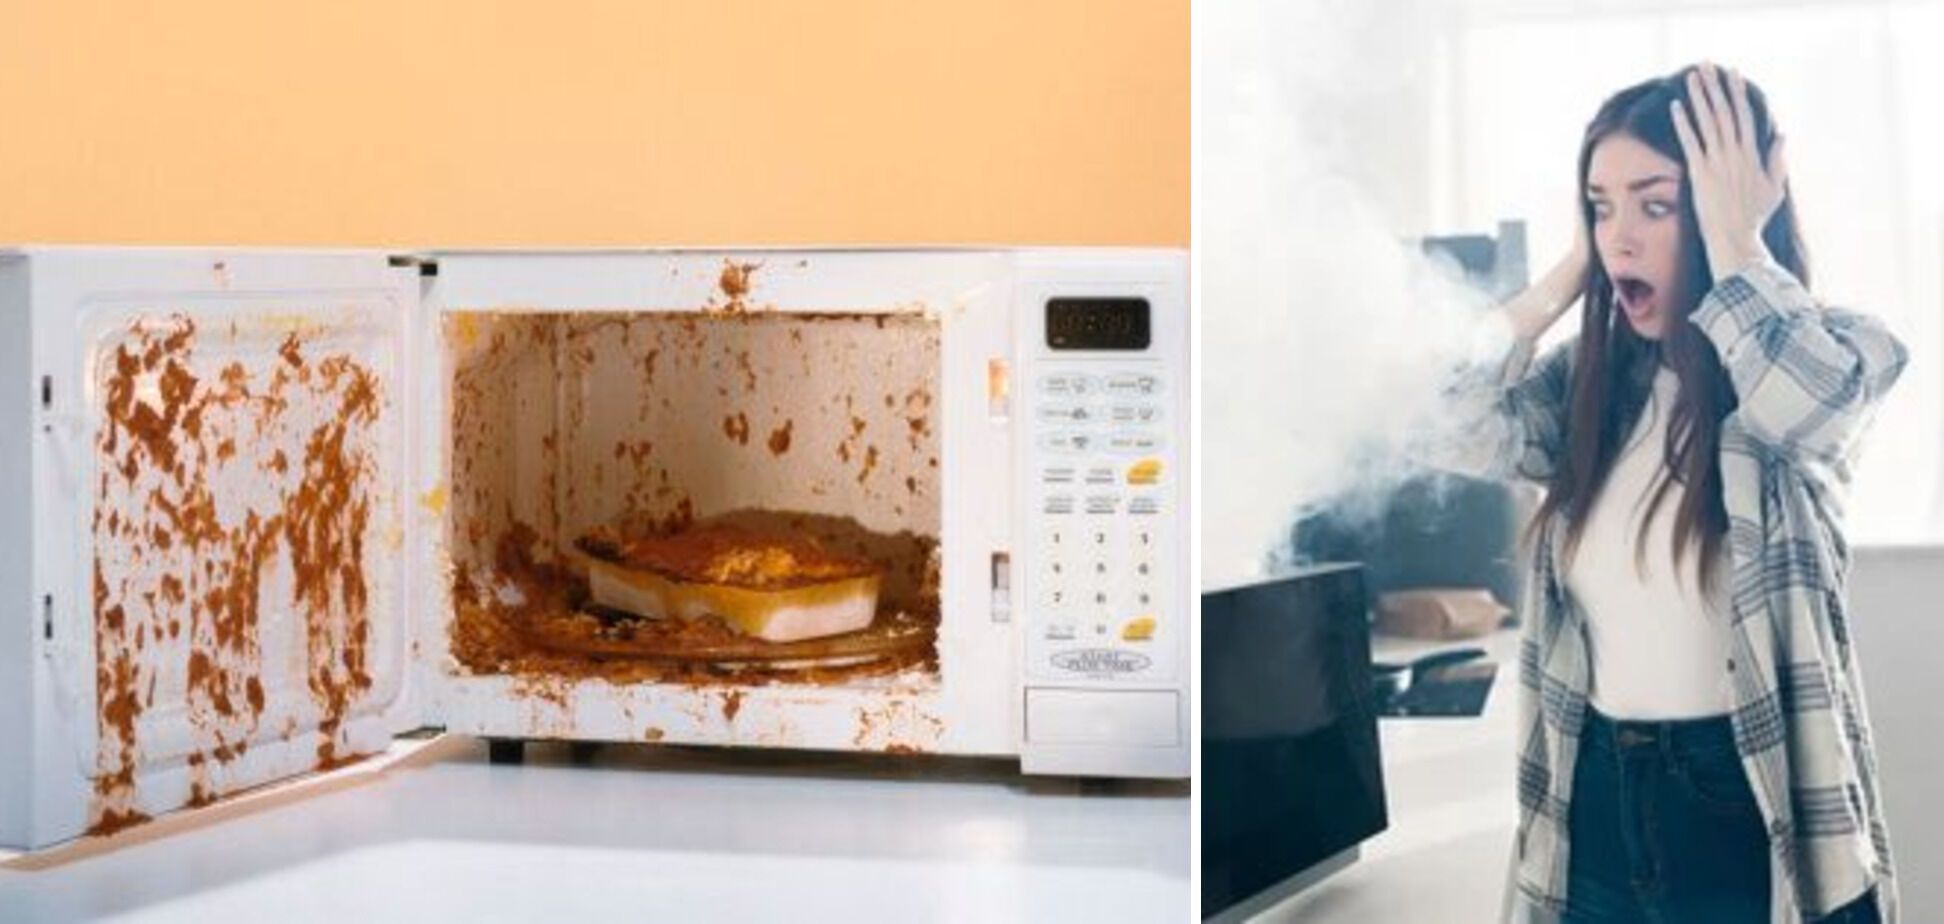 Be careful when heating food in the microwave